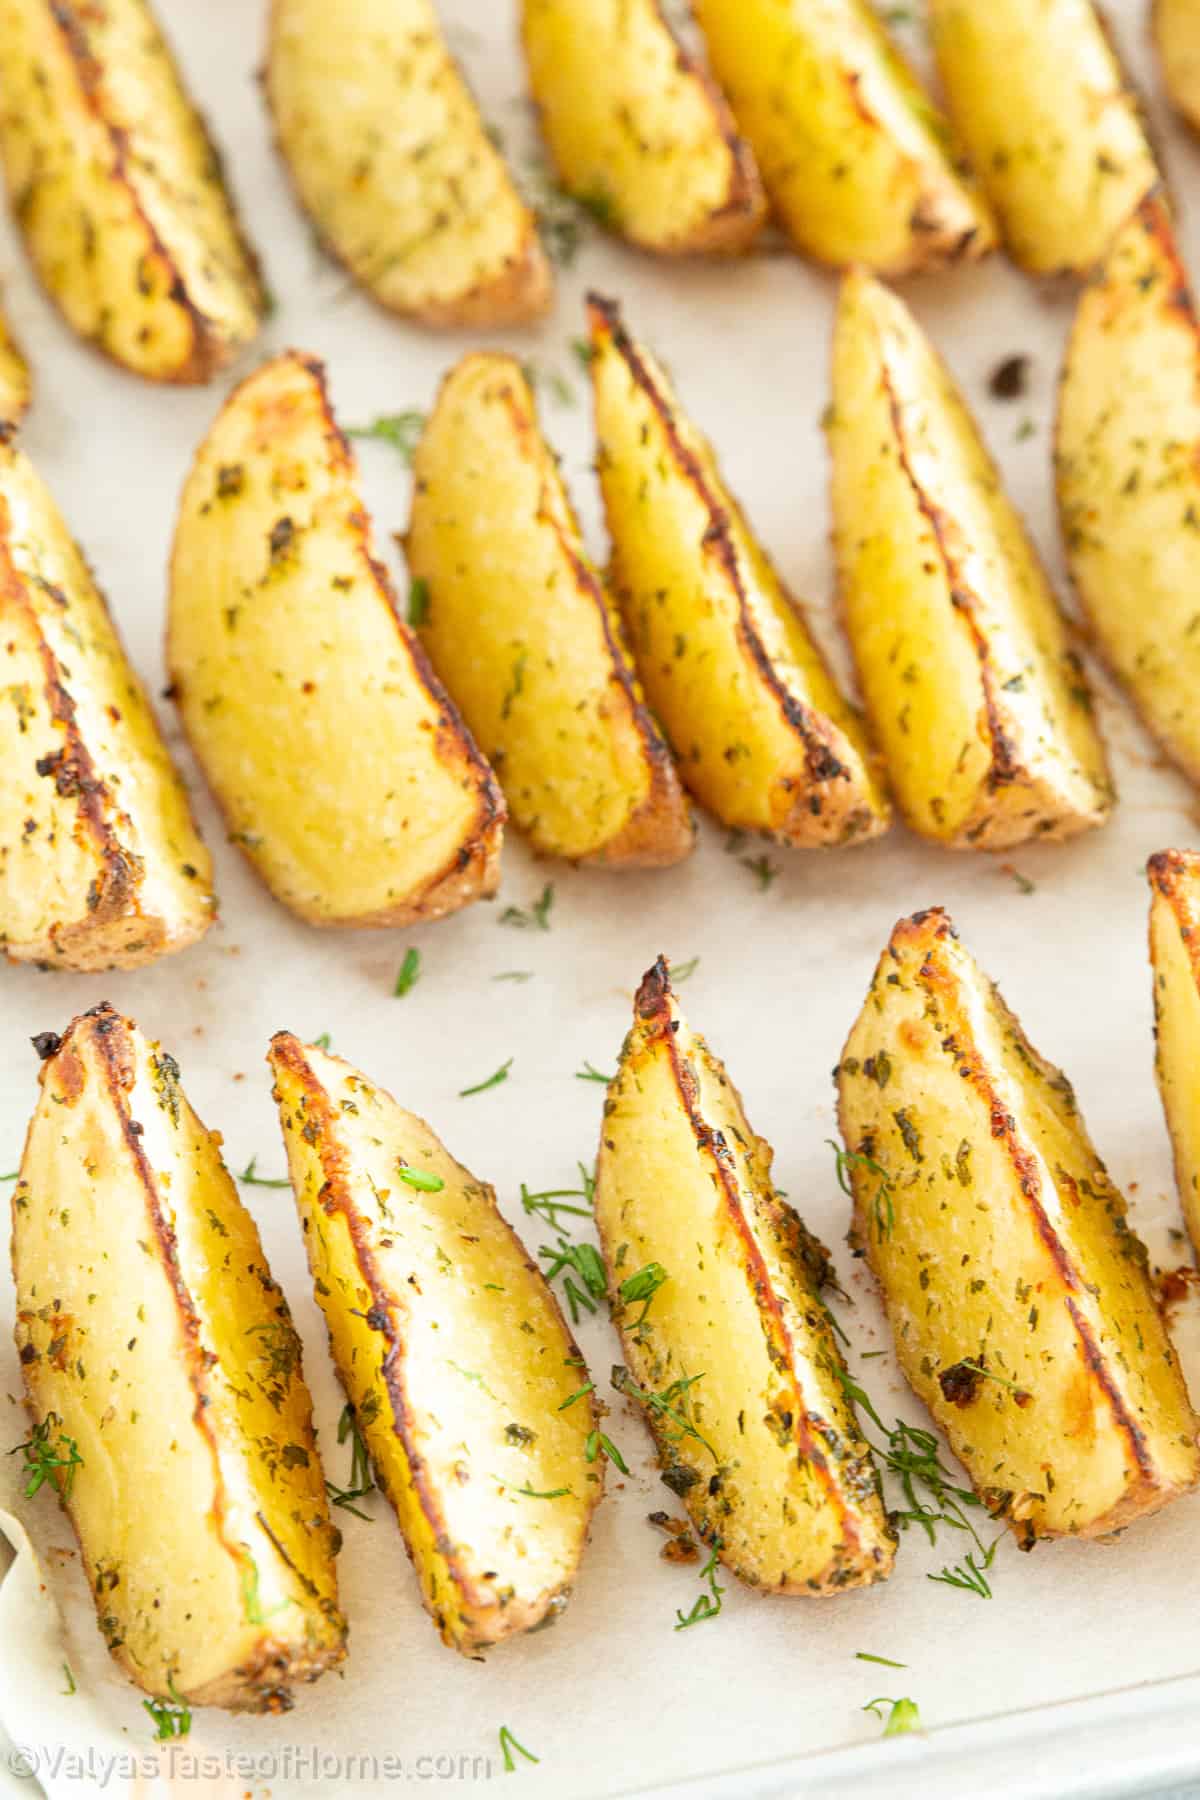 Baked Potato Wedges are a great way to get your potato fix without all the fat and calories of deep-fried potatoes.